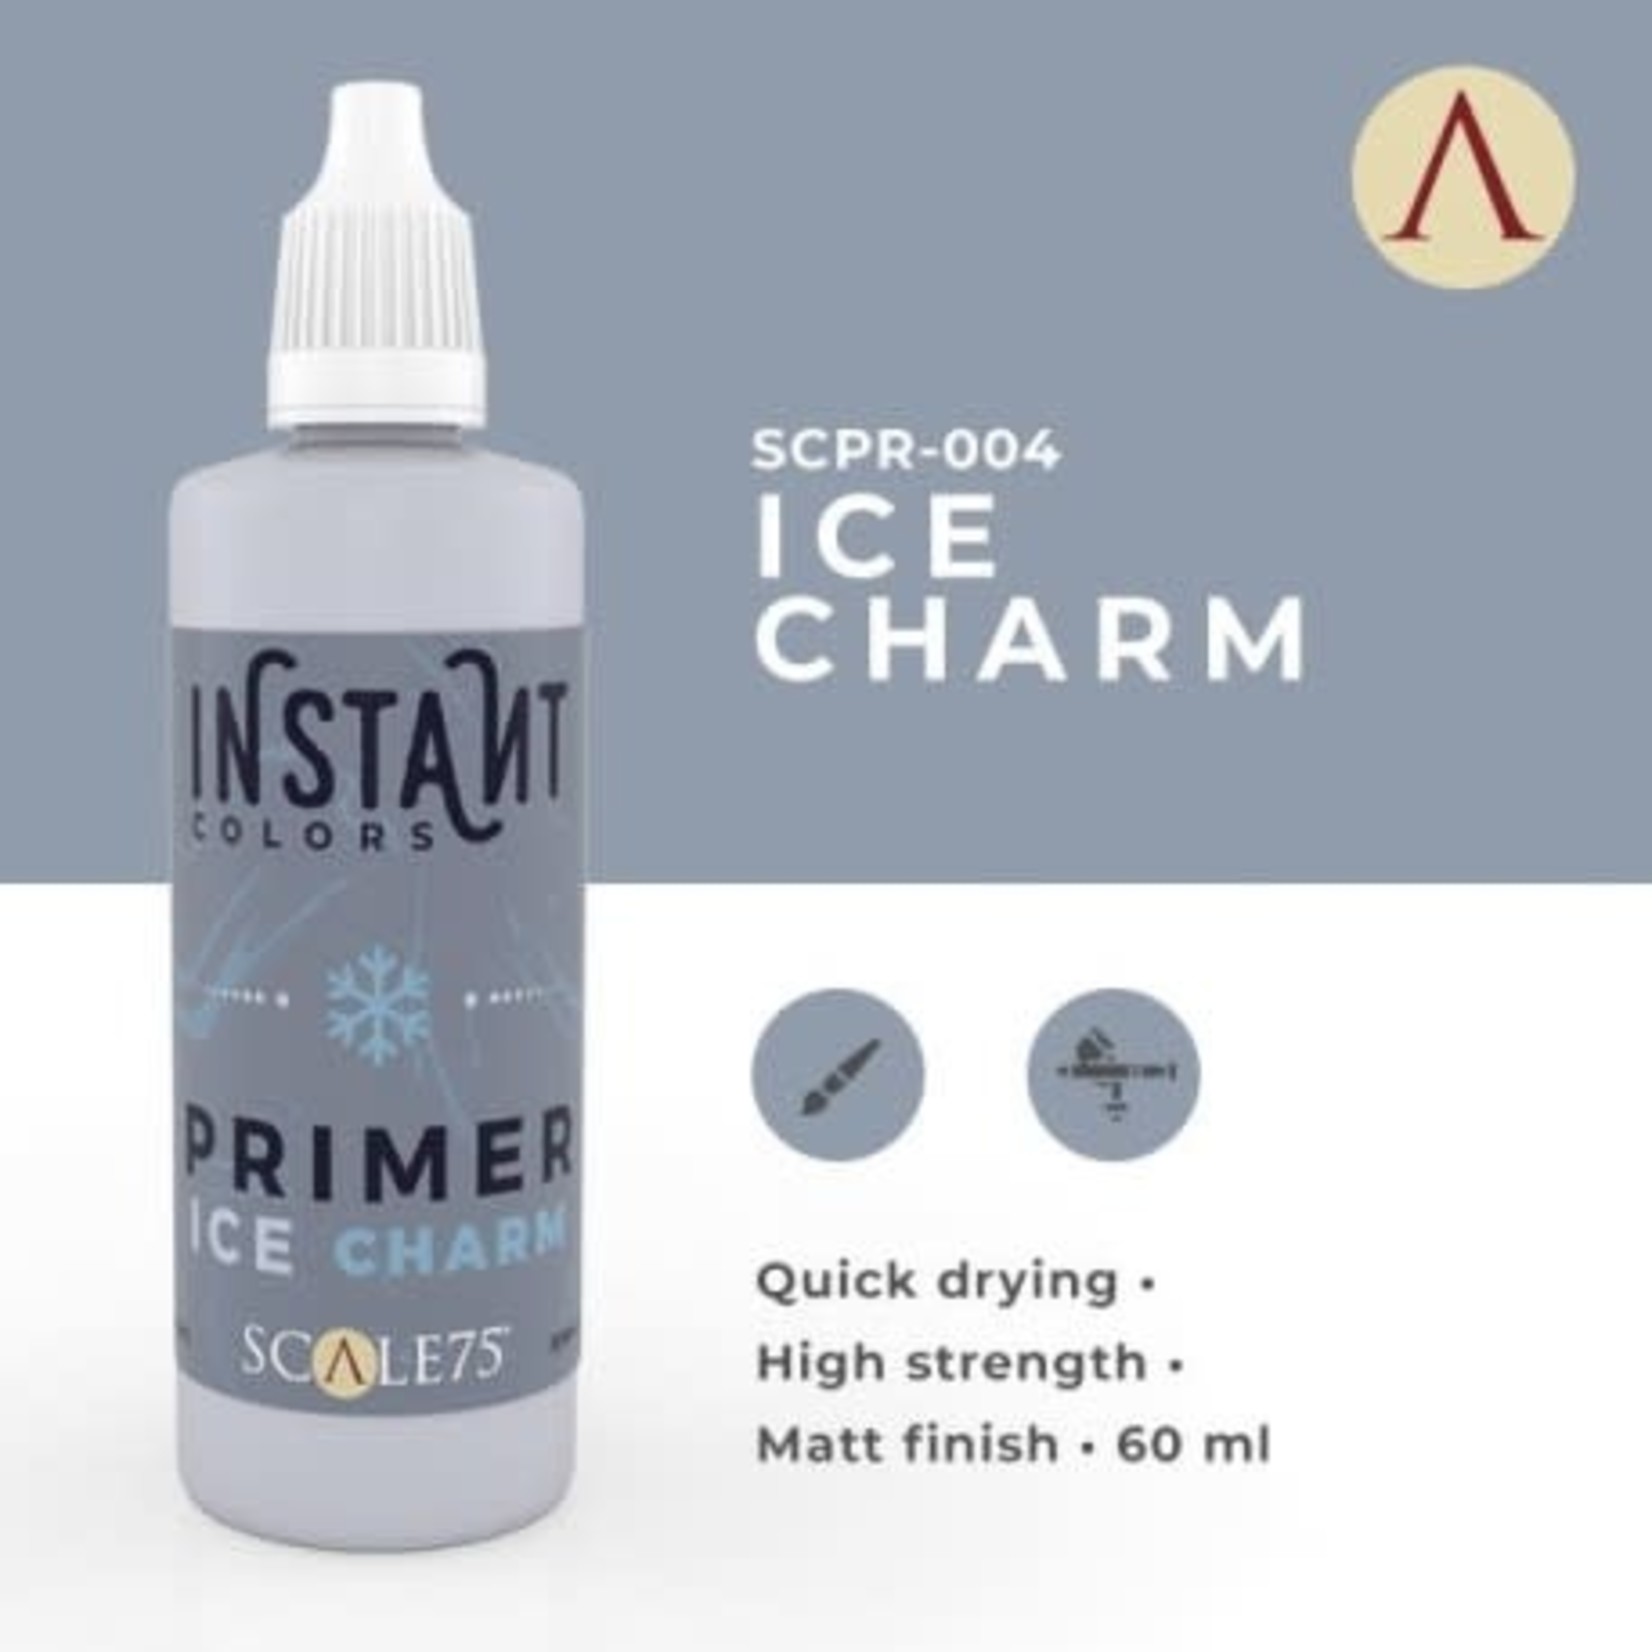 Scale 75 Instant Colors Primer SCPR004 Ice Charm 60ml